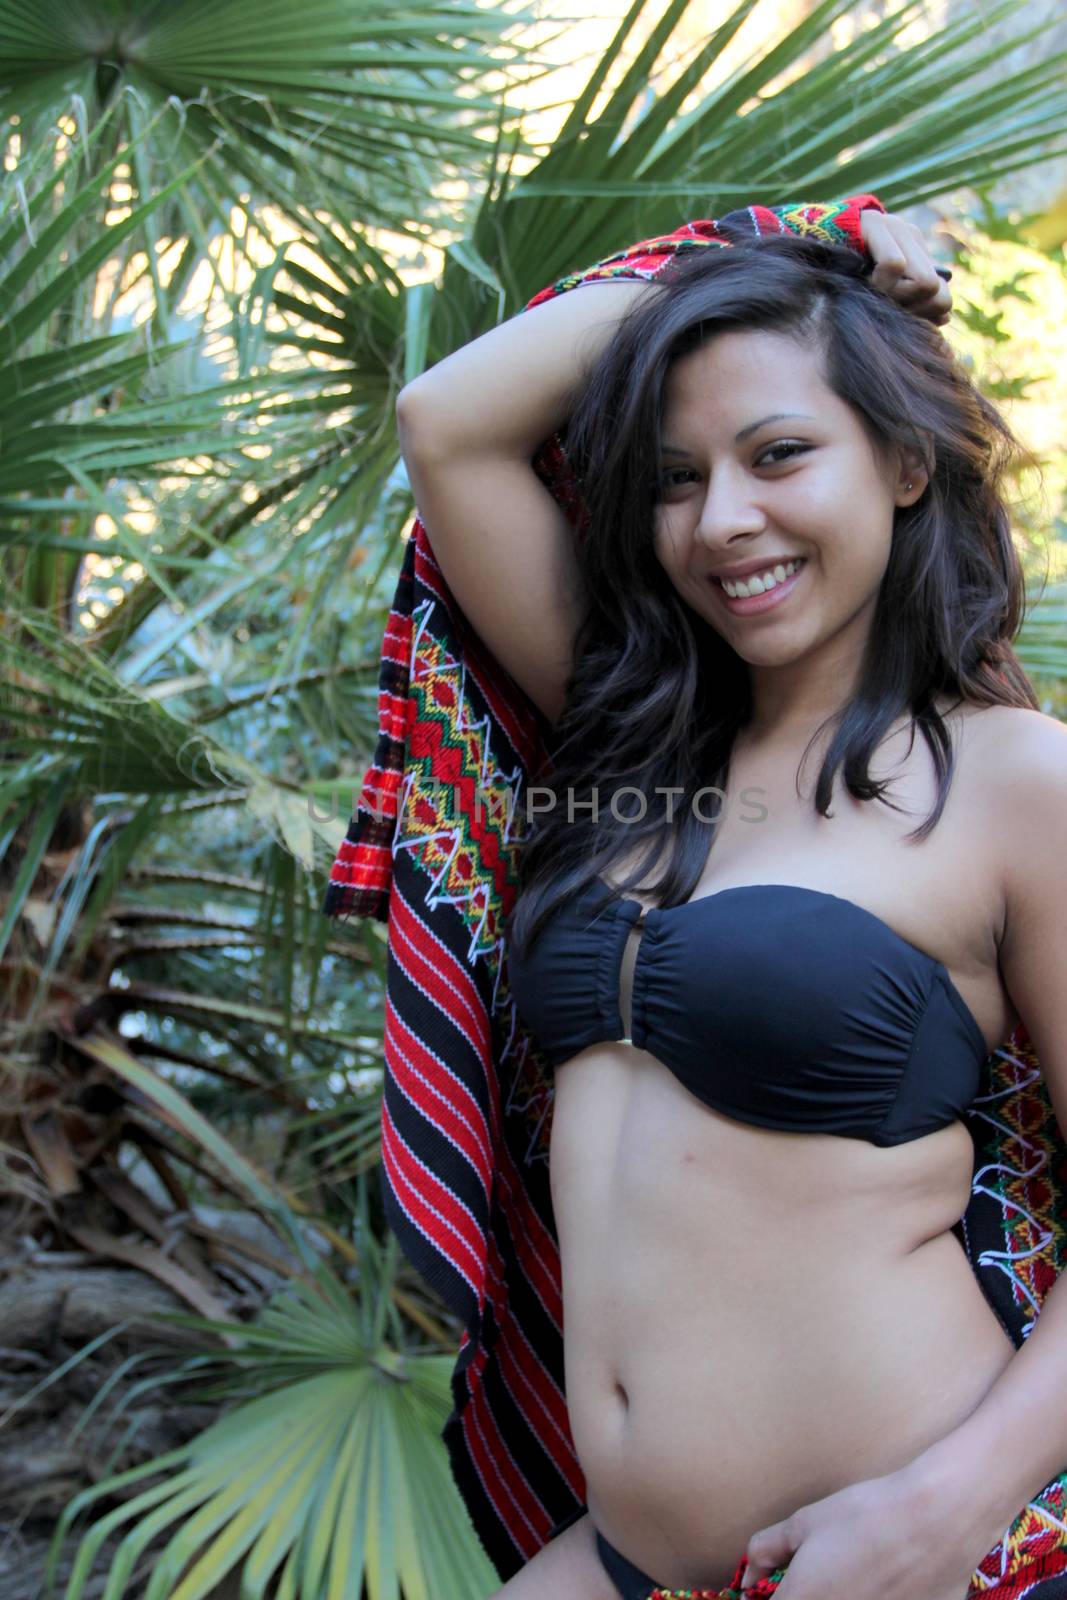 Model shot of a Hispanic beauty in front of a palm tree.